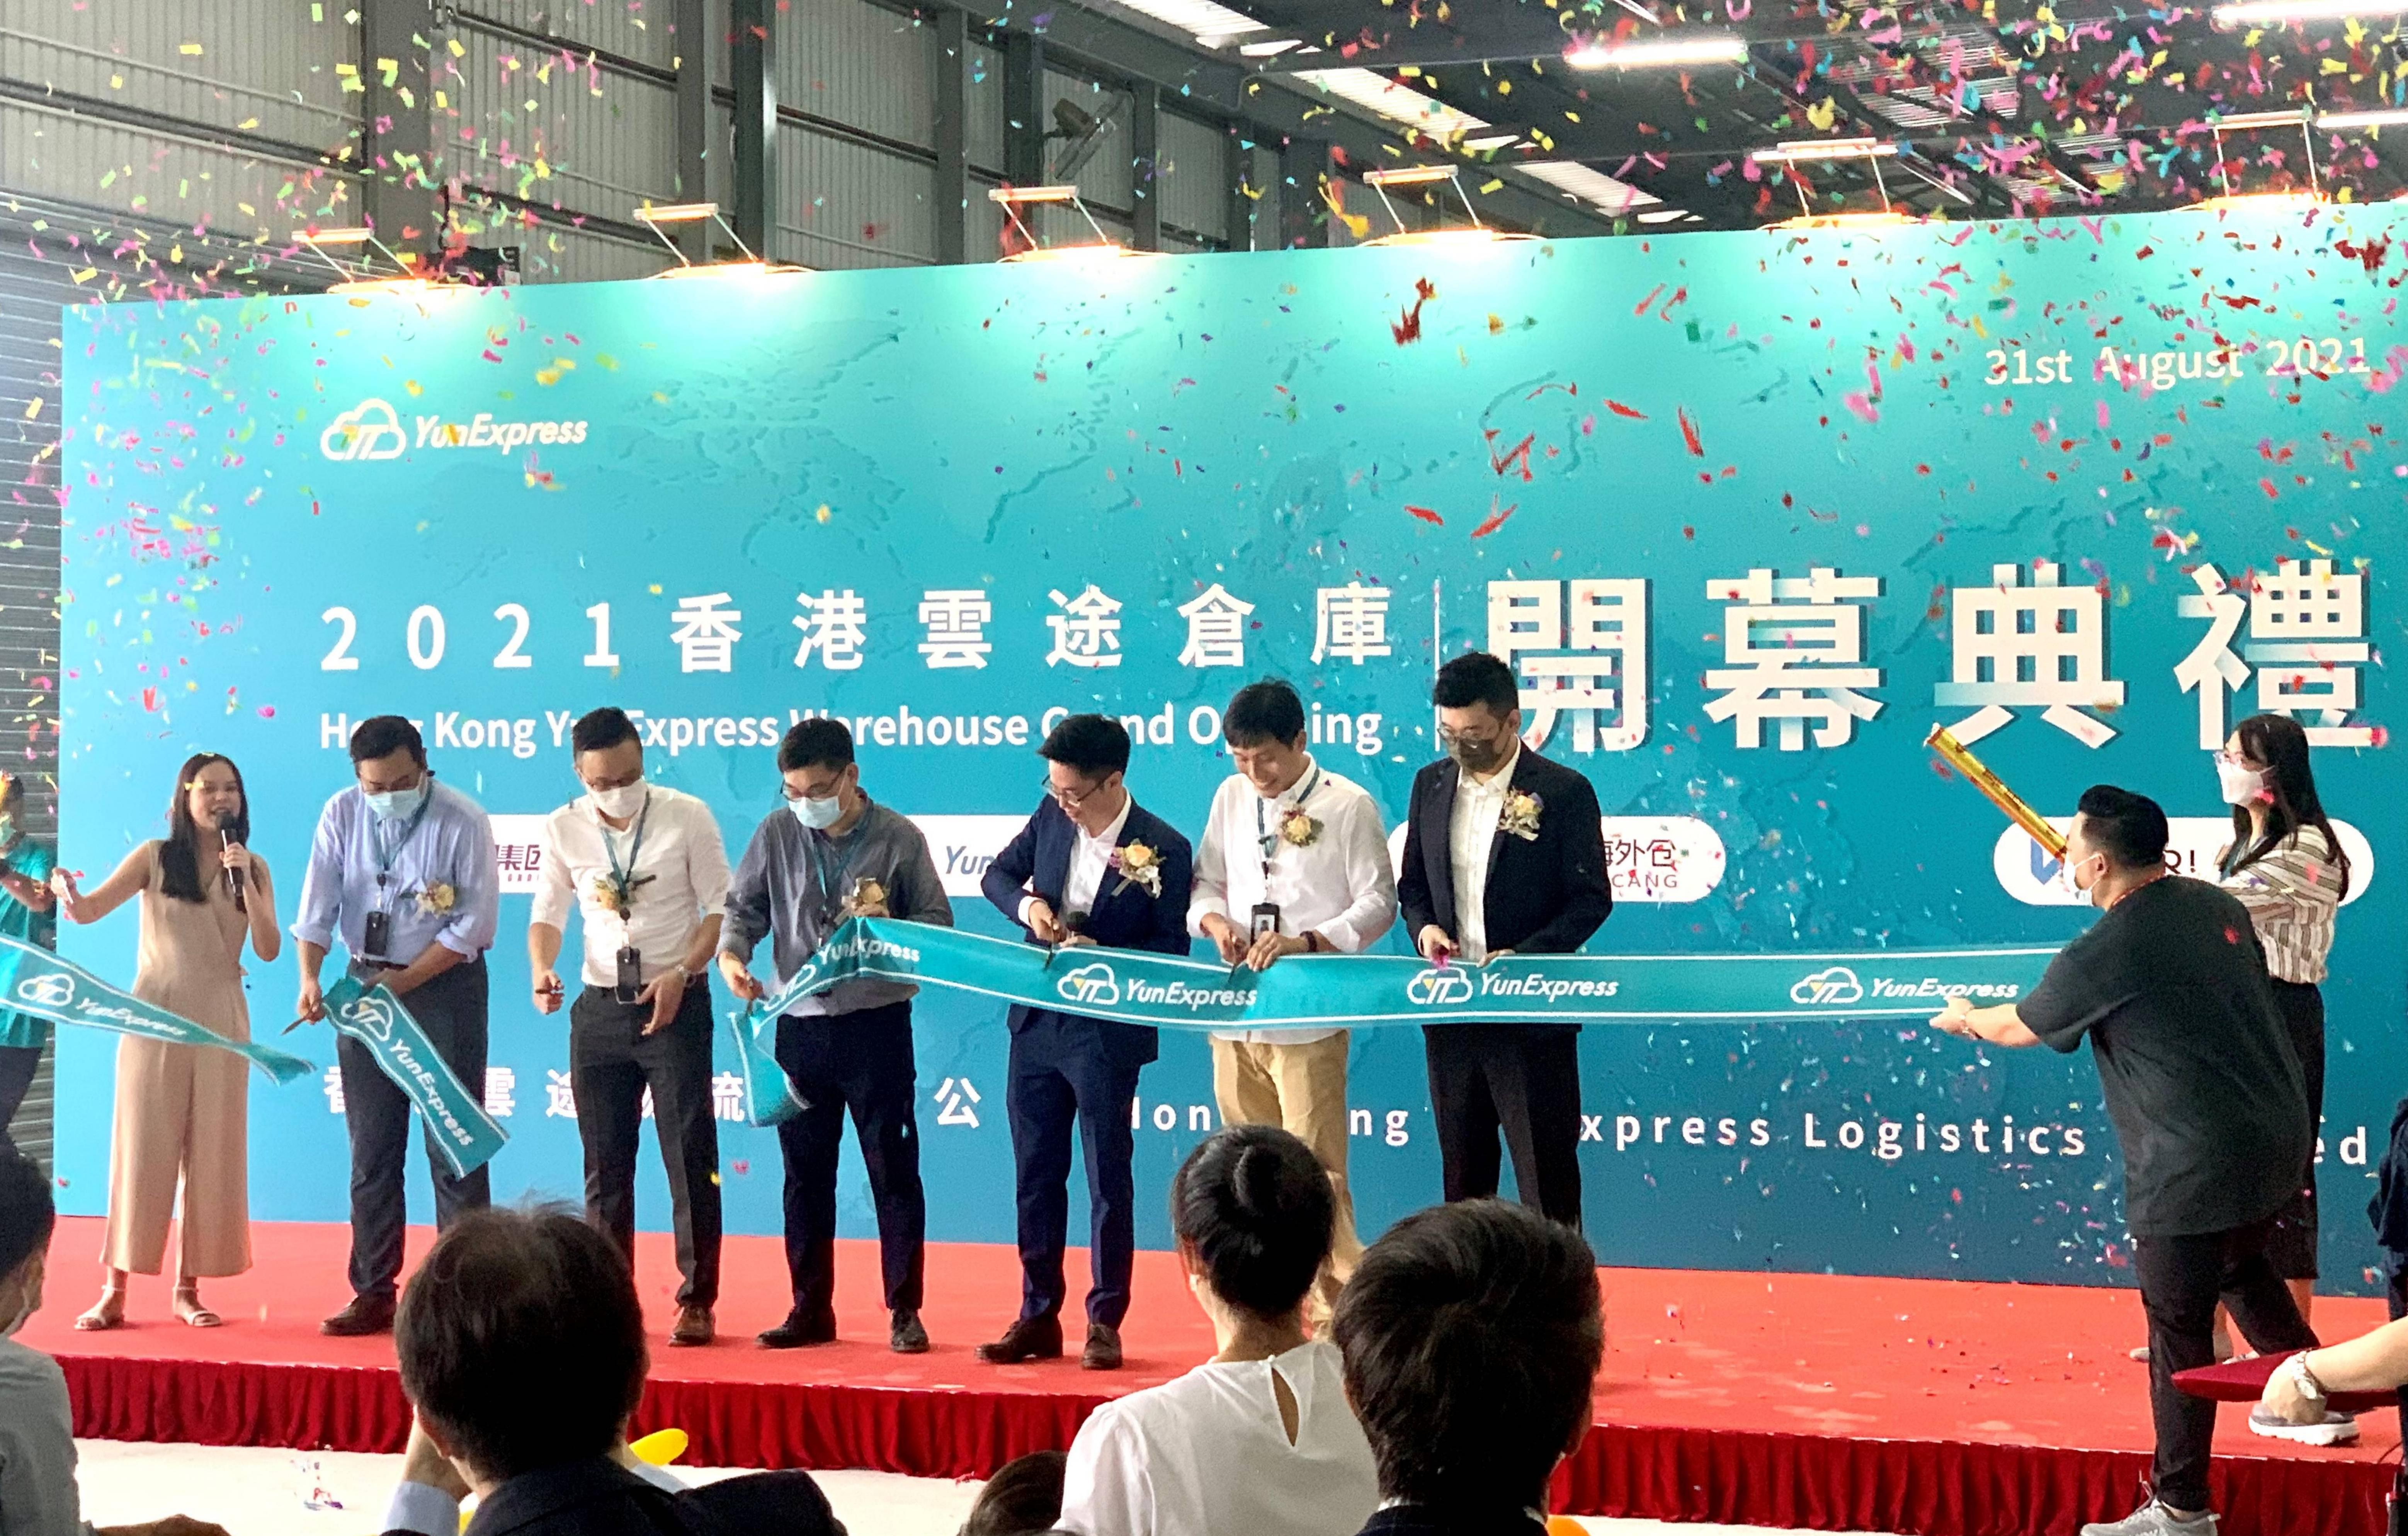 The Grand OpeningCeremony of YunExpress Asia Pacific Hub was Held in Hong Kong